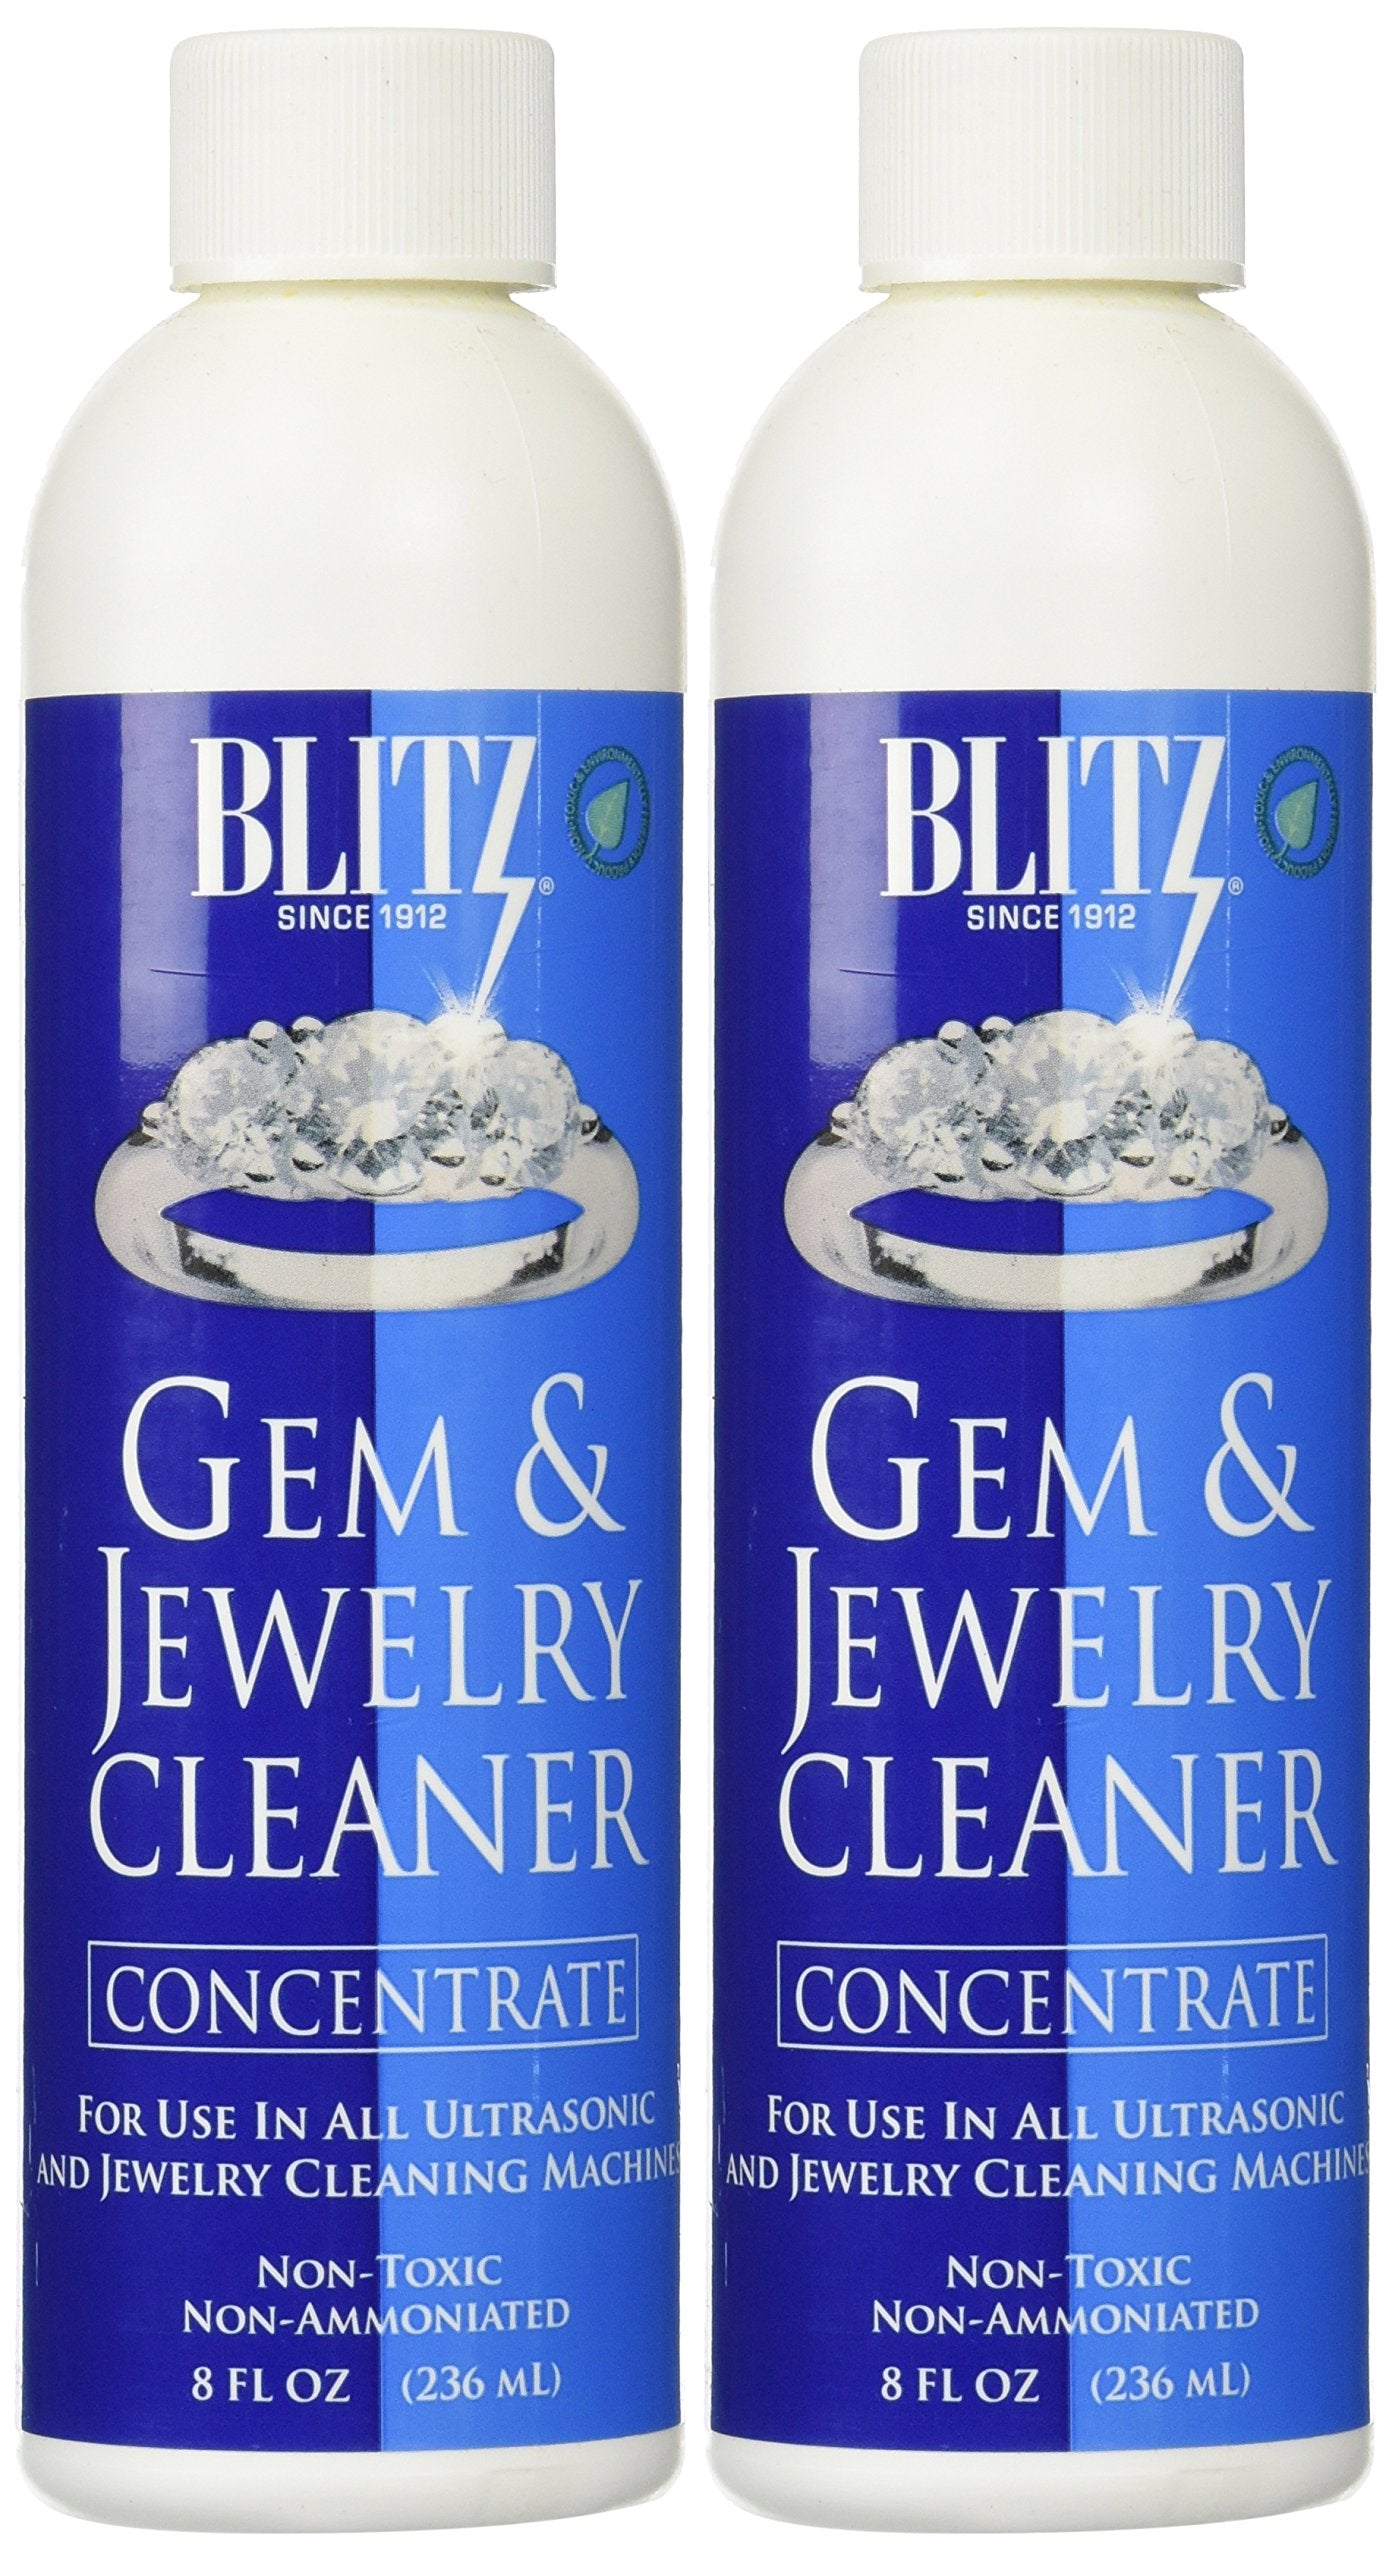 Blitz 653 Gem & Jewelry Non-Toxic Cleaner Concentrate for use in Cleaning Machines, 8 Ounces, 2-Pack  - Like New